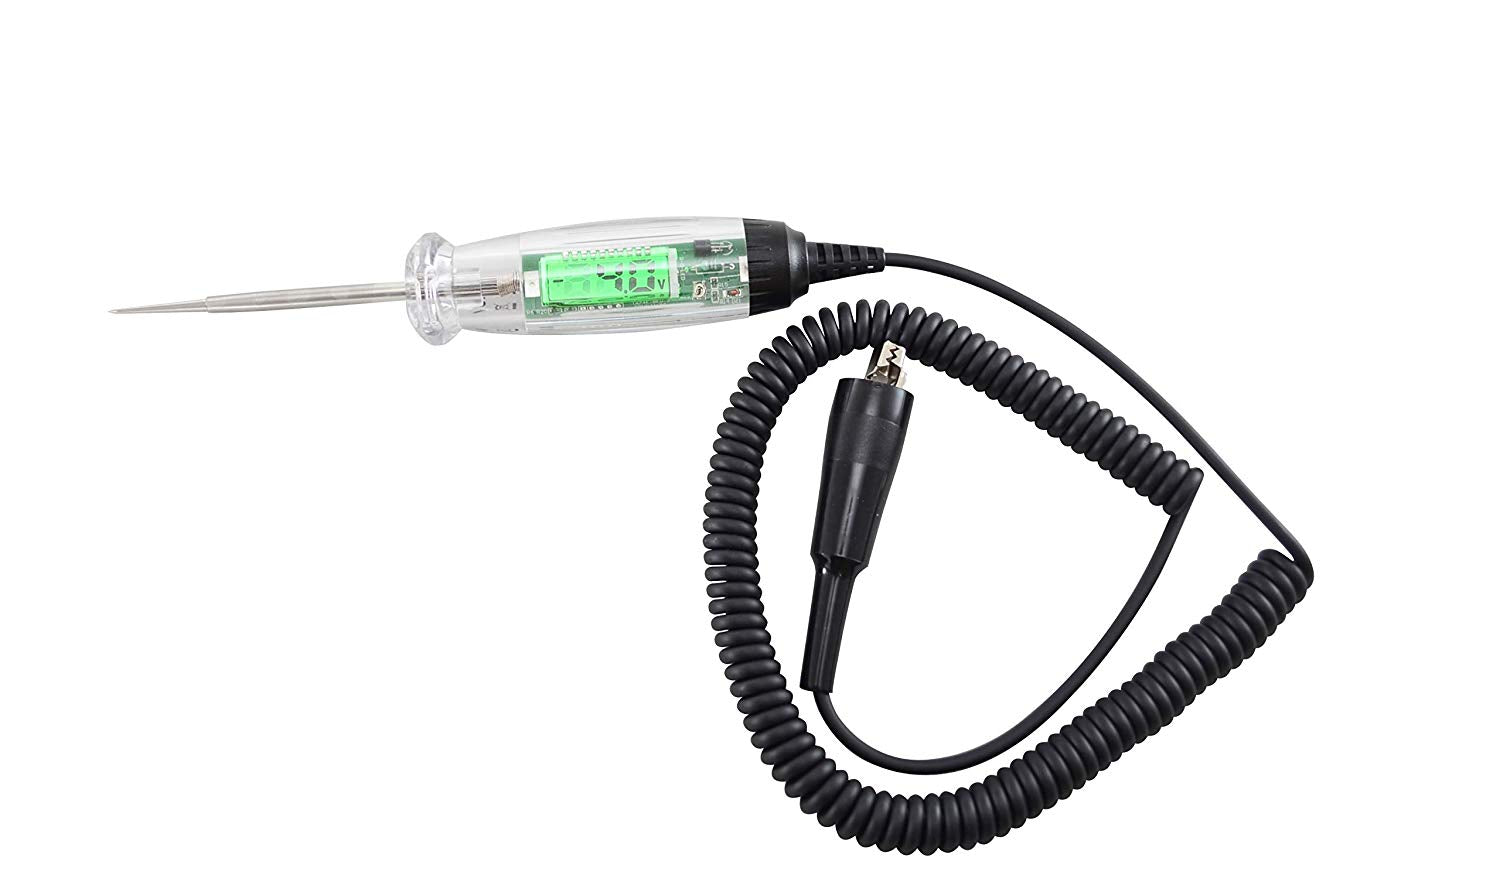 Astro Pneumatic Tool 7767 Digital LCD Wide Range Positive and Ground Circuit Tester - 3.5-60V - MPR Tools & Equipment